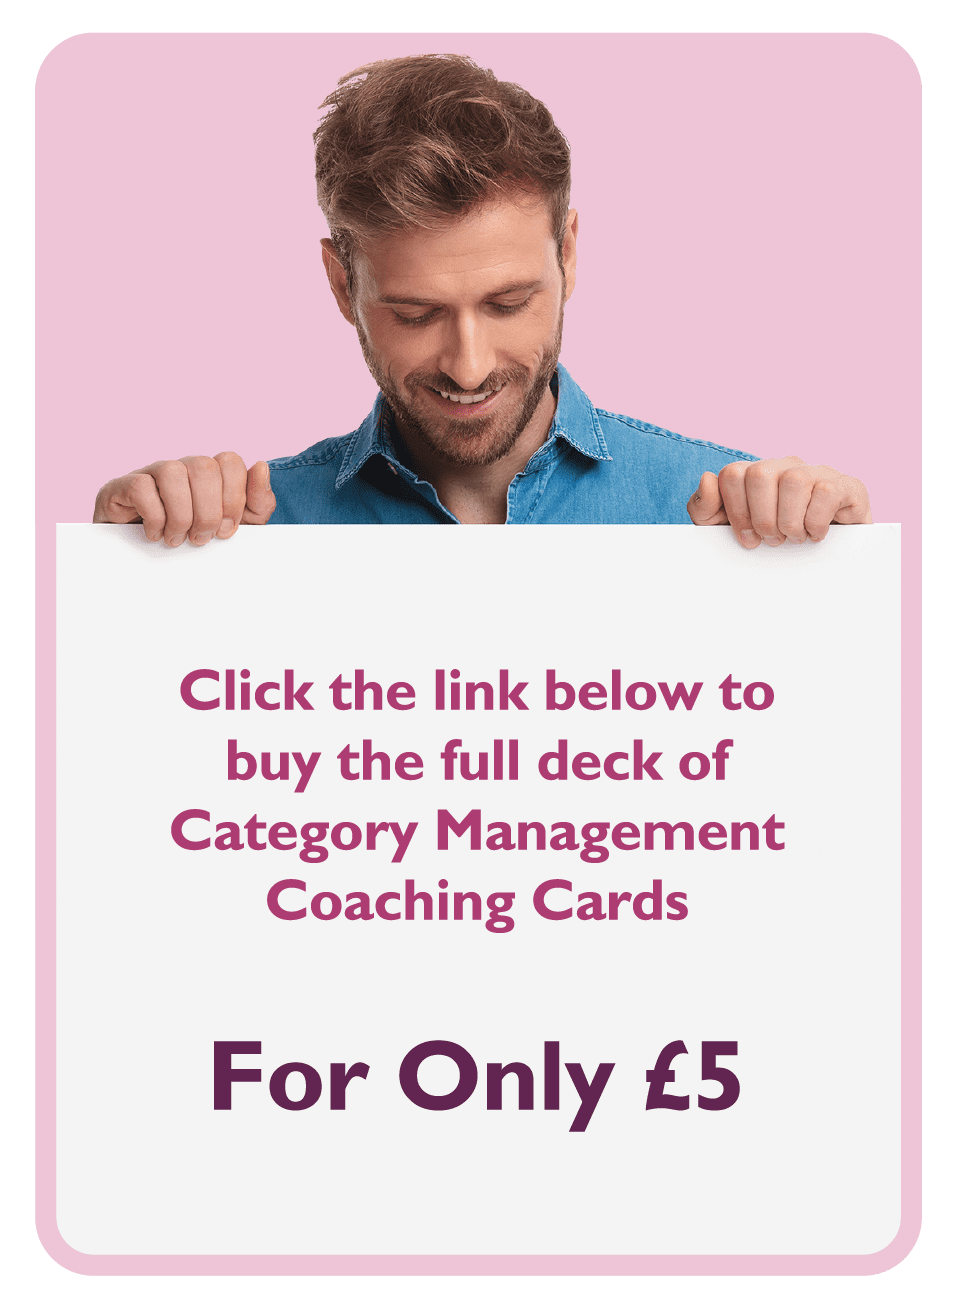 Negotiation coaching card titled For Only £5